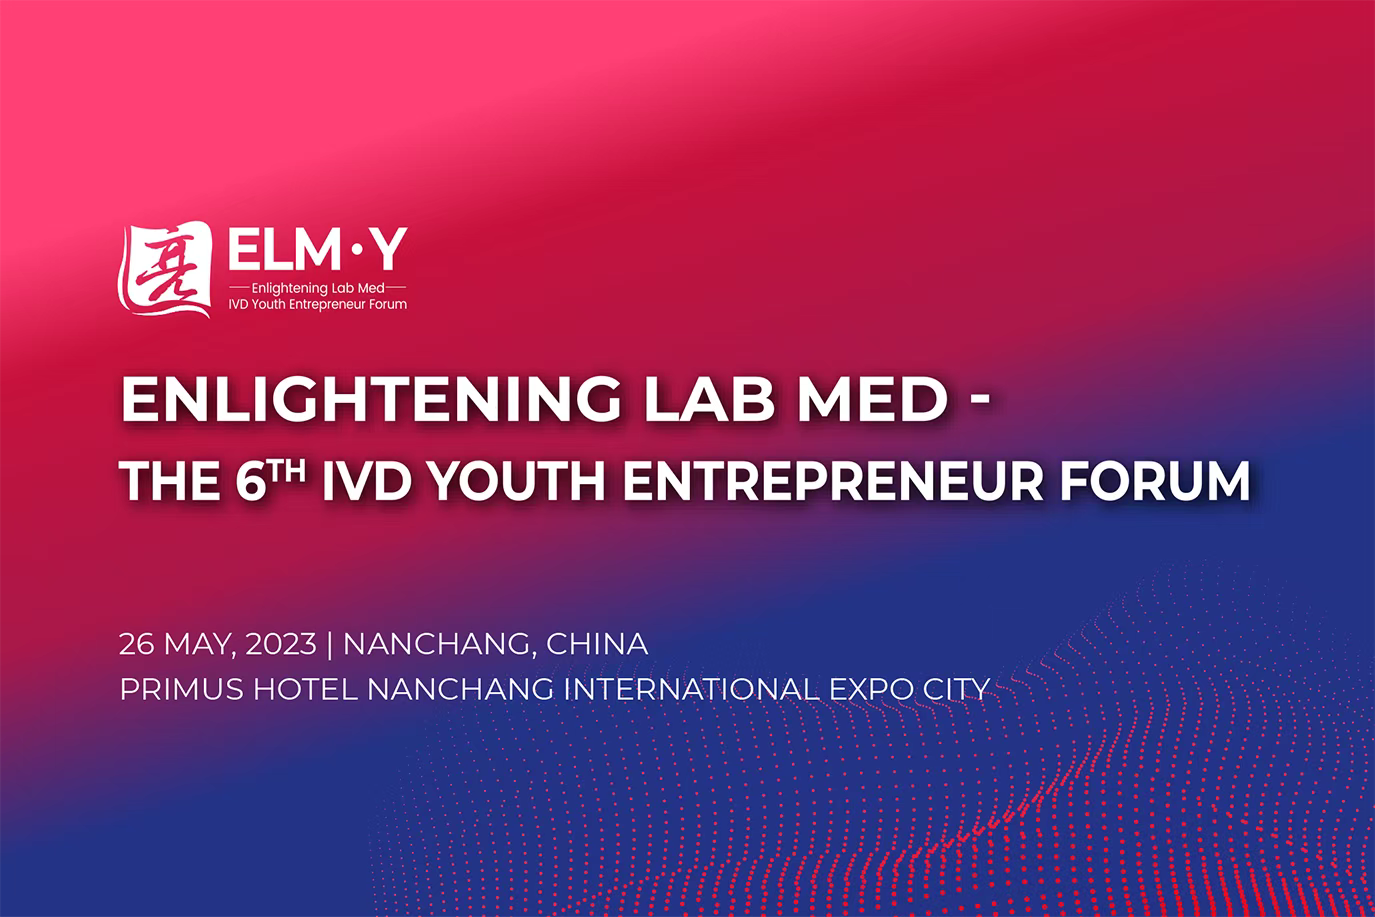 Enlightening Lab Med - The 6th IVD Youth Entrepreneur Forum is planned to open on May 26